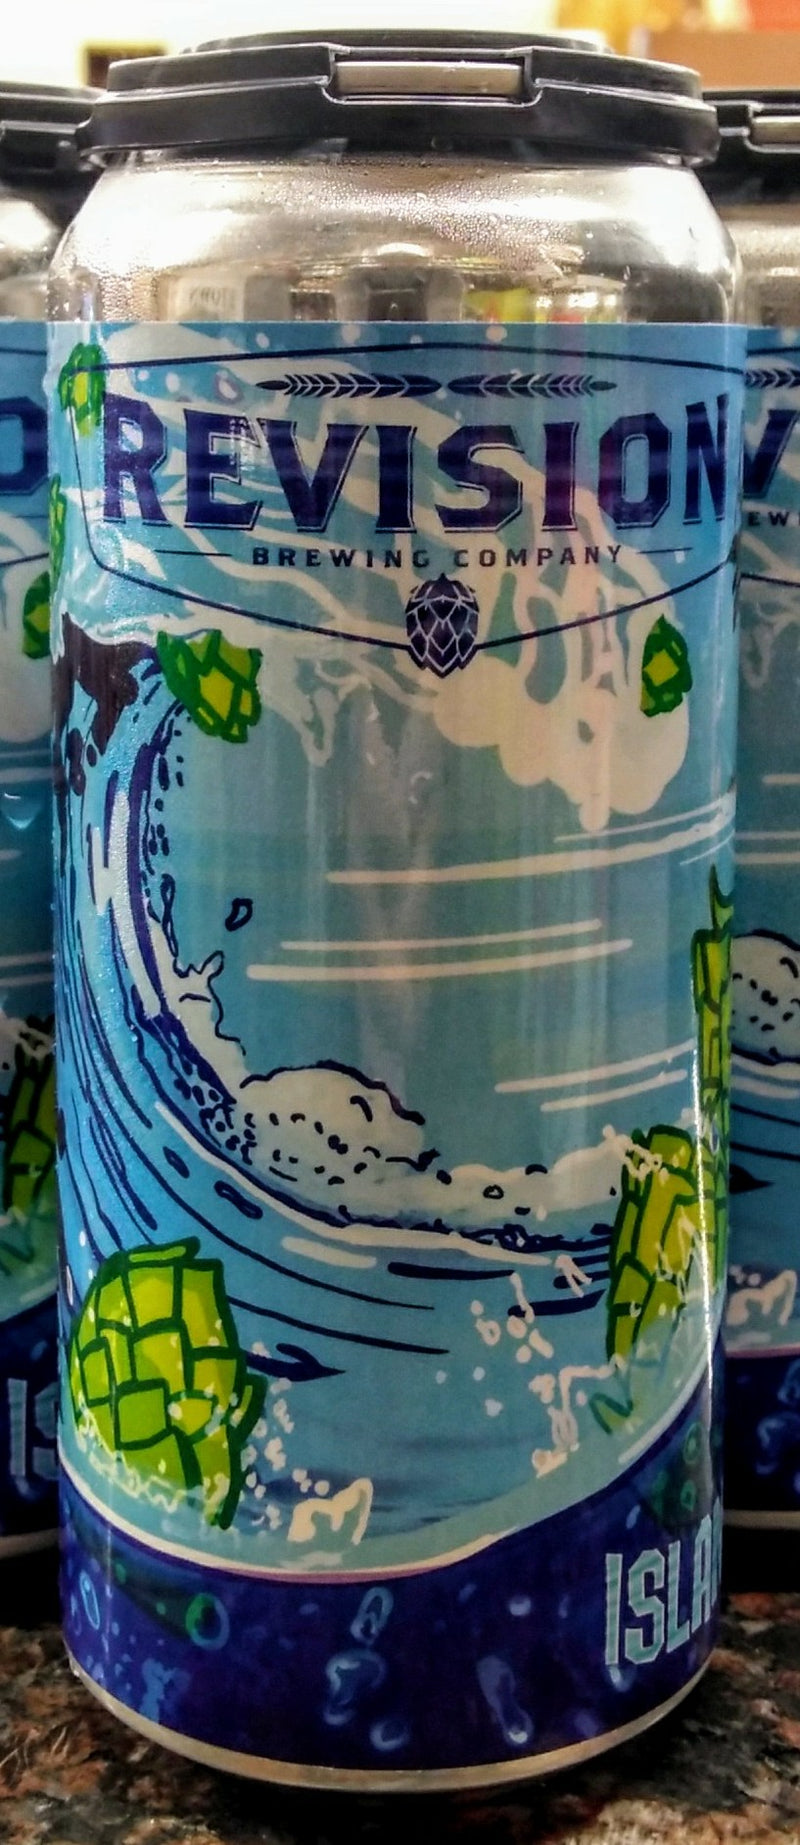 REVISION BREWING CO. ISLAND WAVES HOPPY ALE 16oz can